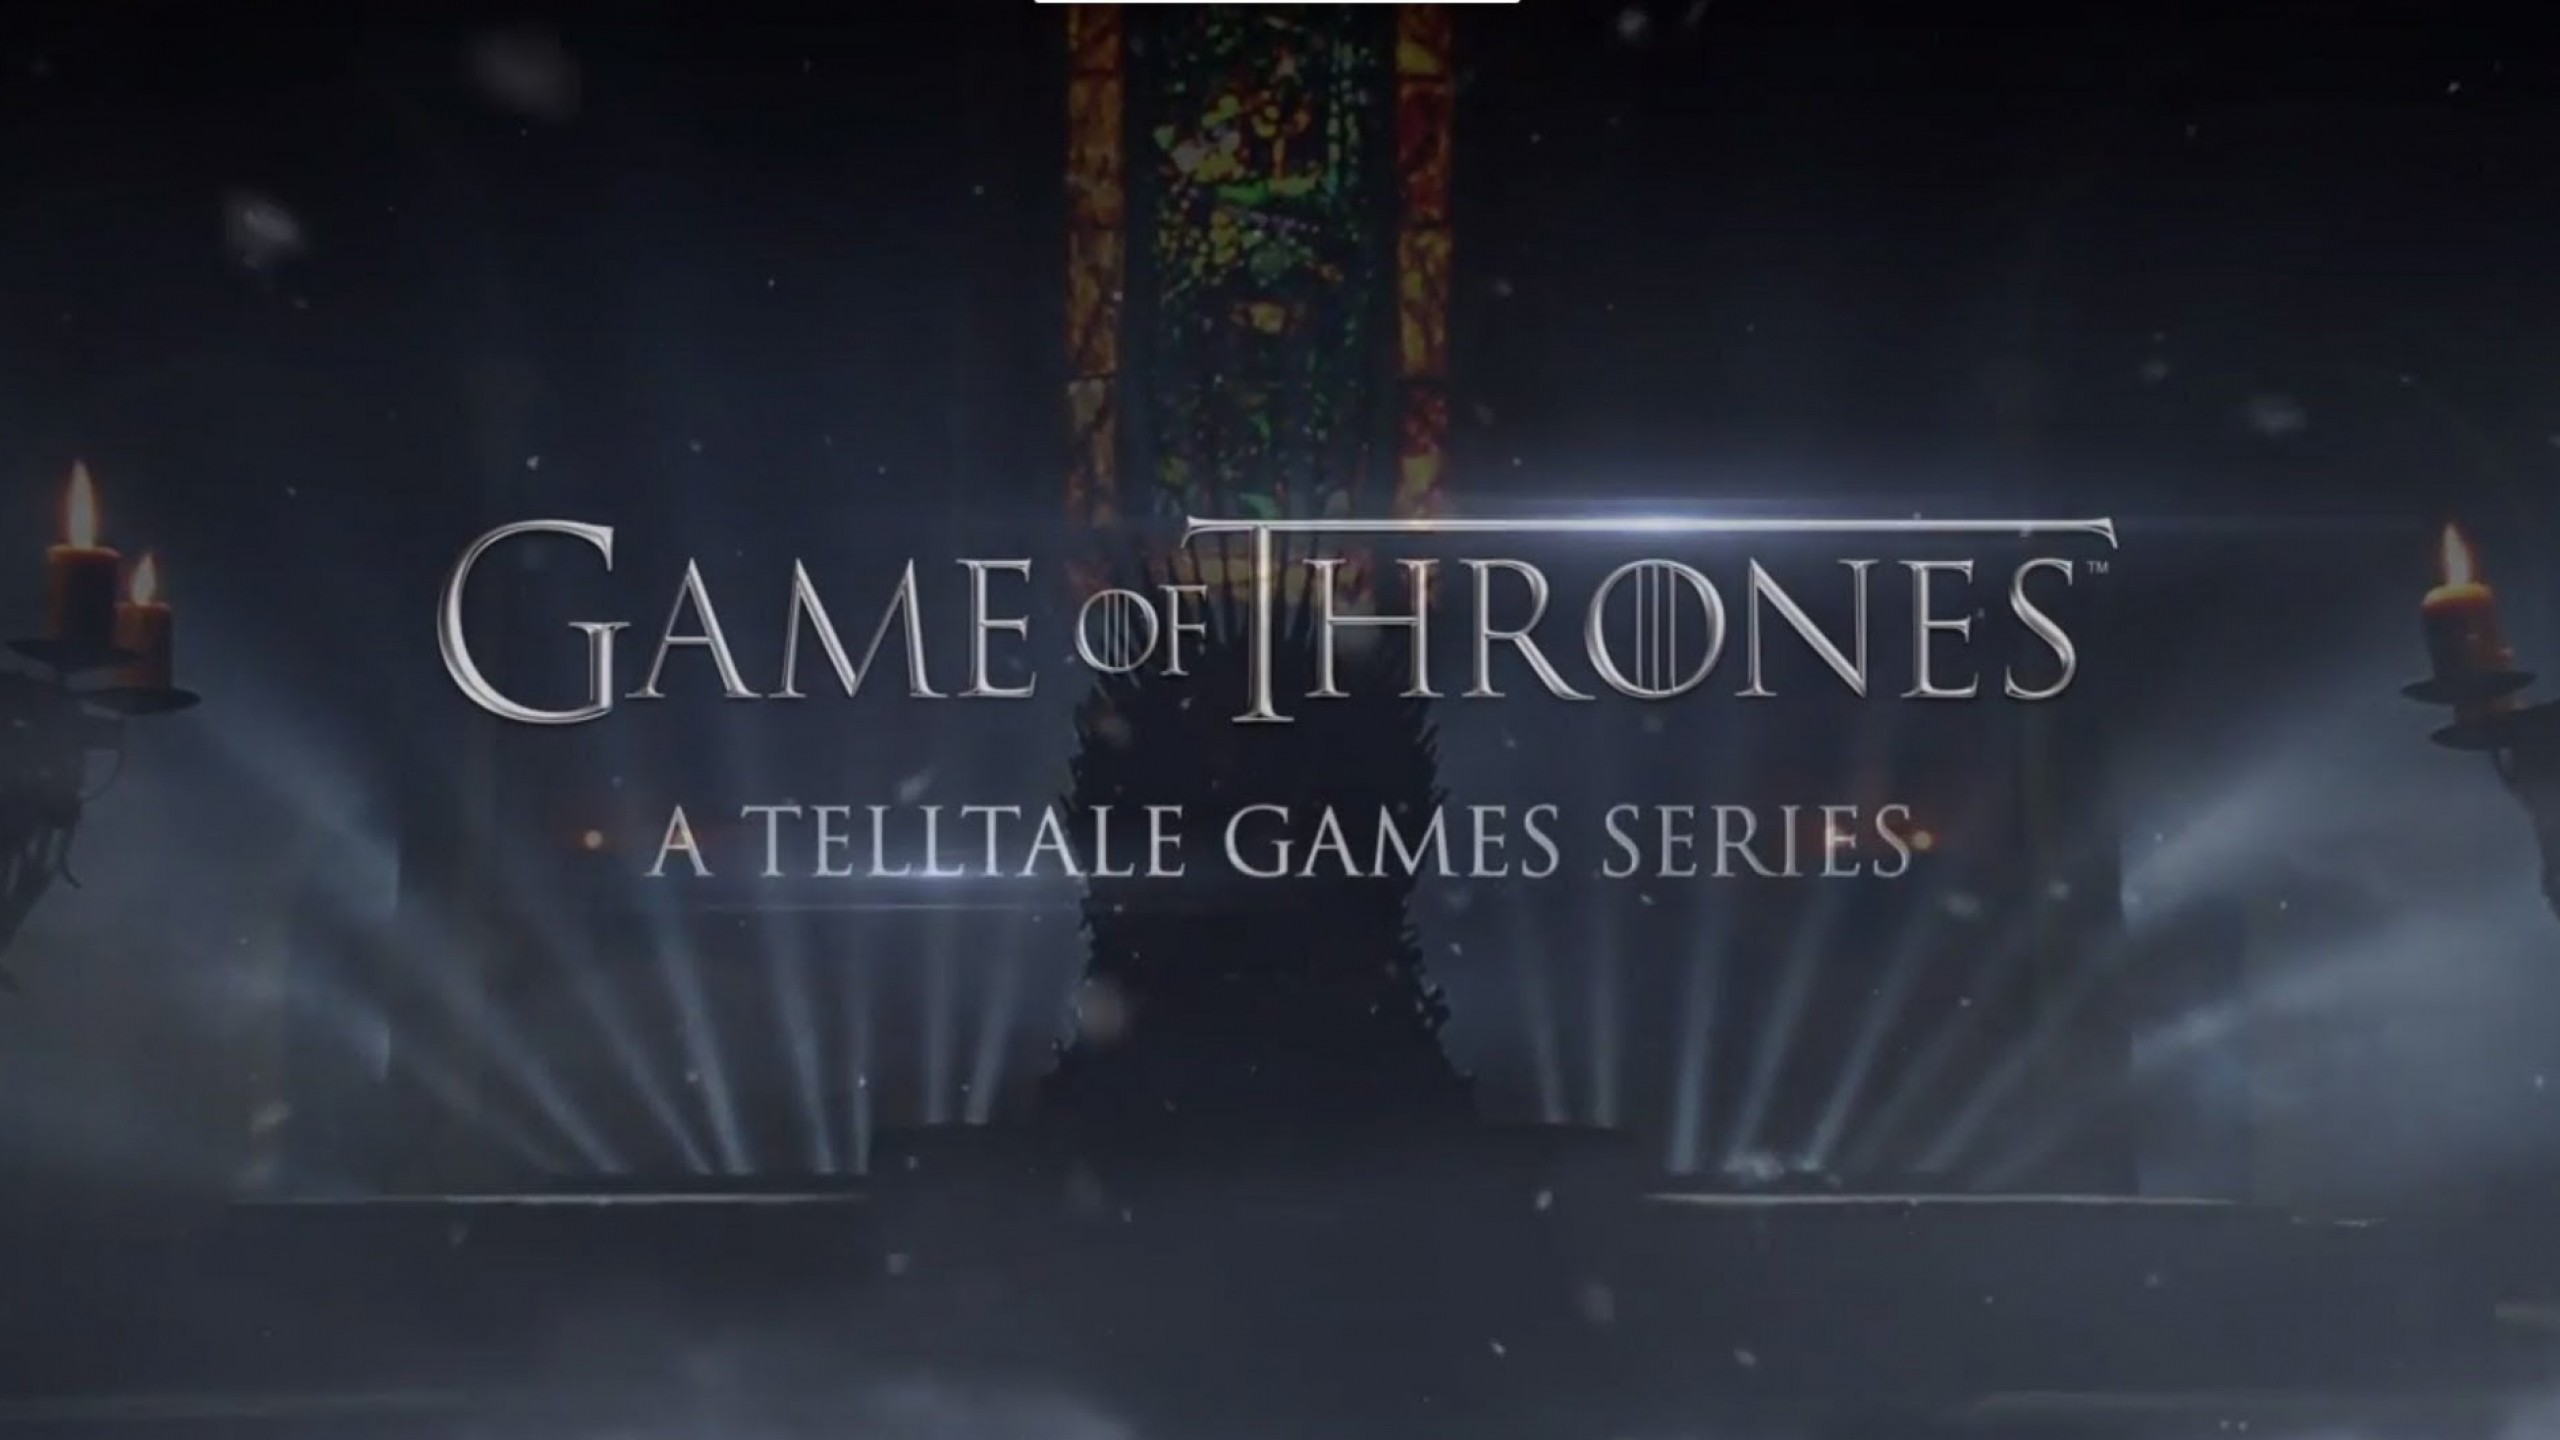 2560x1440  Wallpaper game of thrones a telltale games series, macos, mobile,  pc,